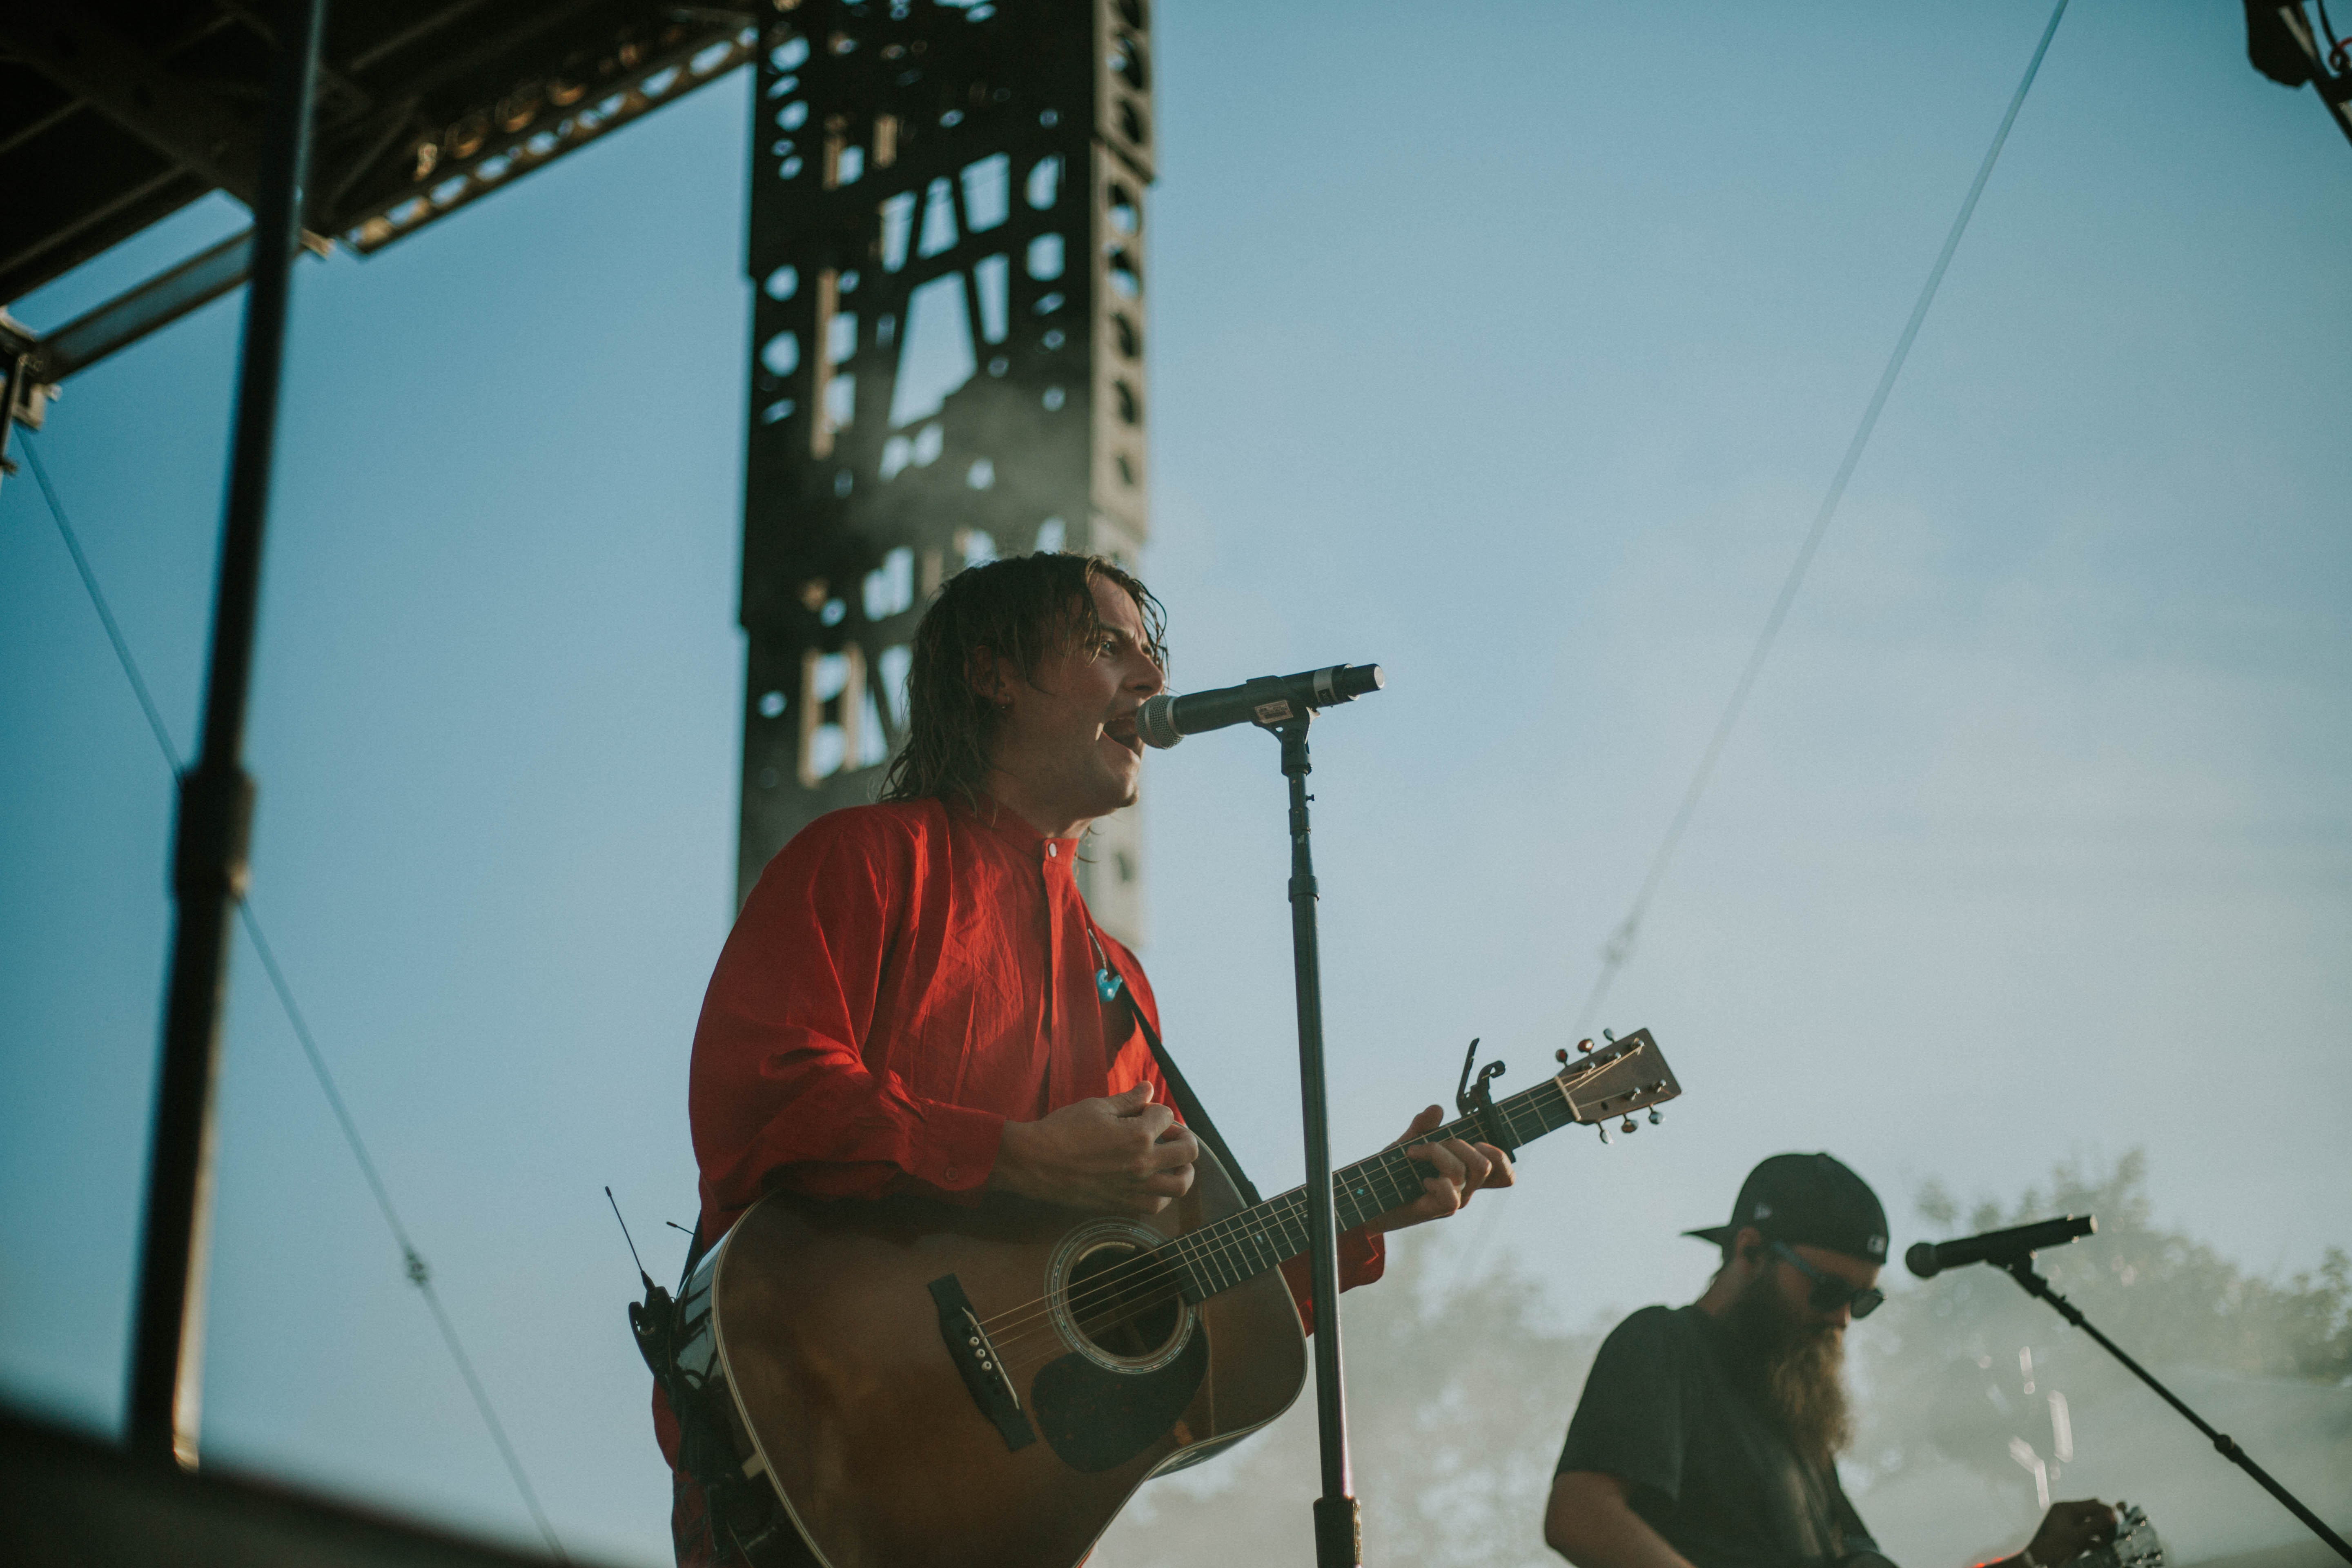 Judah and the Lion Basilica Block Party Music Festival